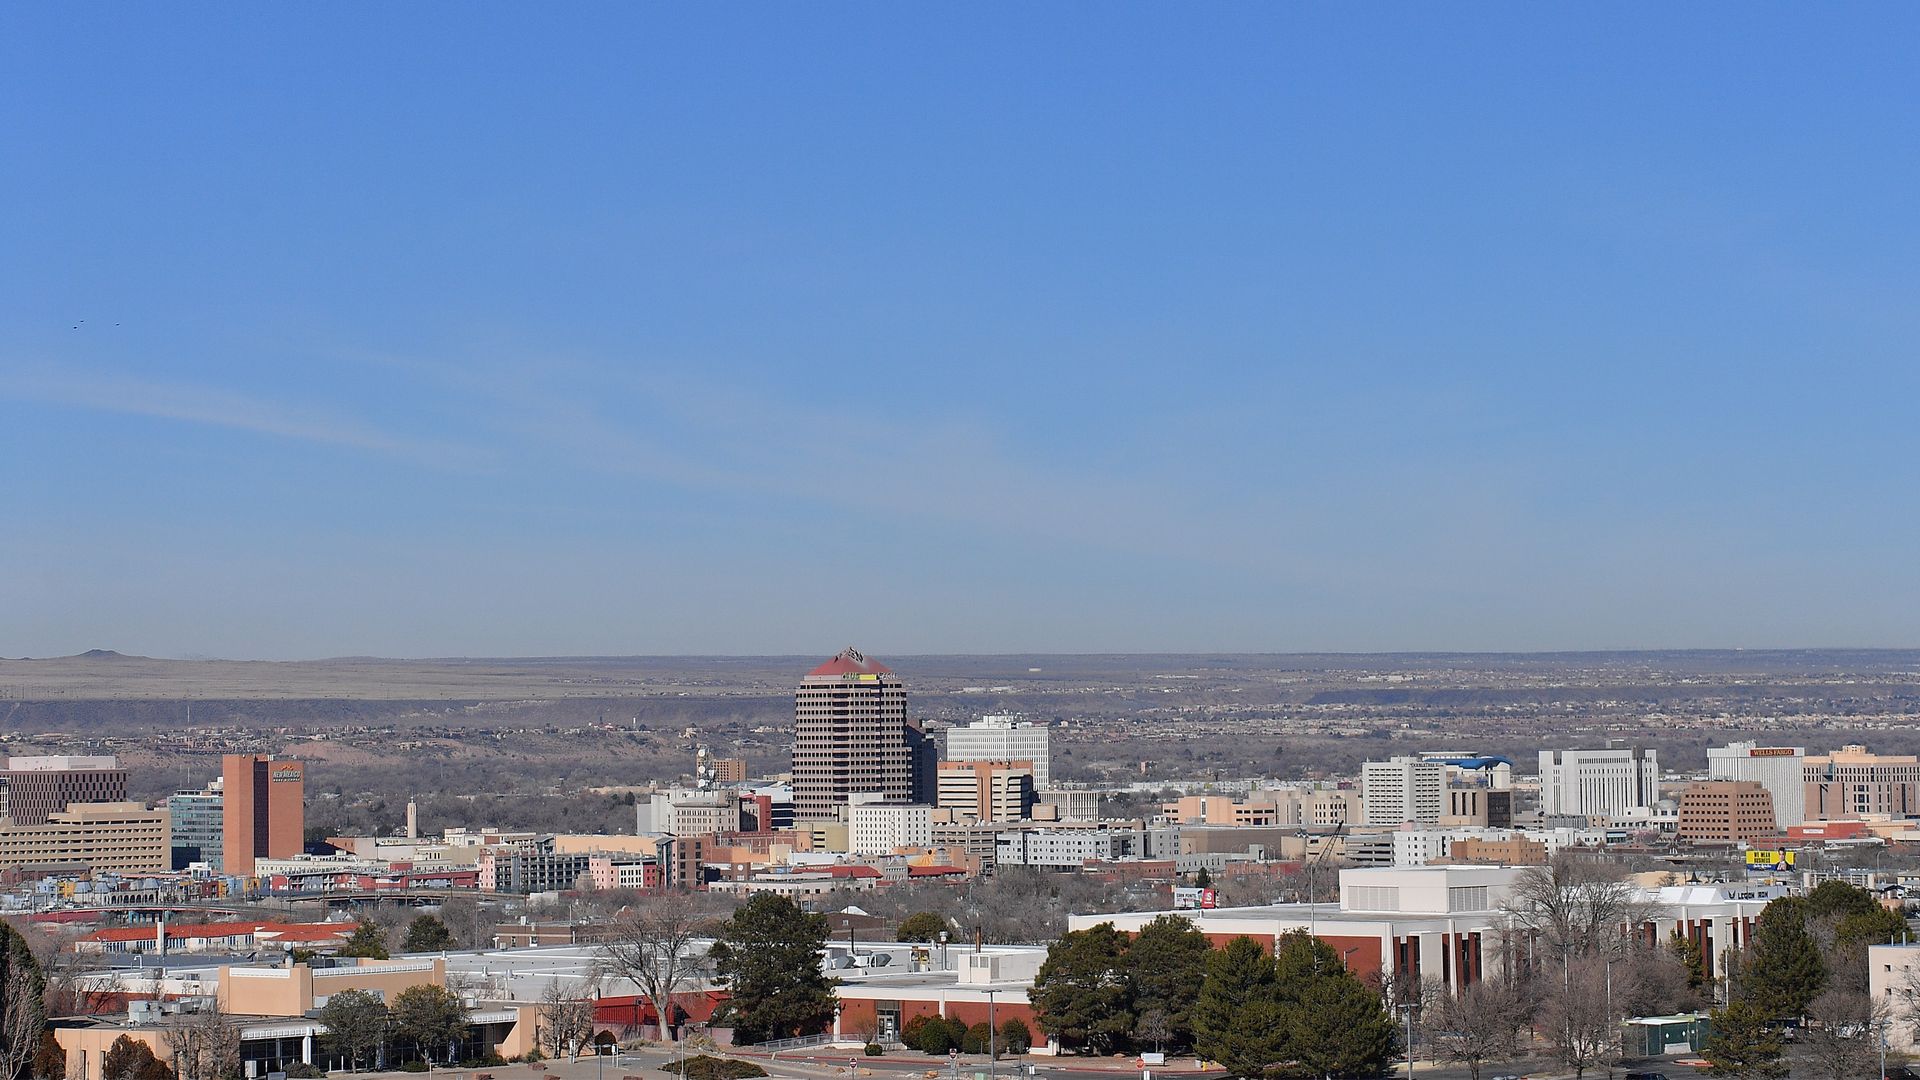 Downtown Albuquerque is seen before the New Mexico Bowl game between the Central Michigan Chippewas and the San Diego State Aztecs at Dreamstyle Stadium on December 21, 2019